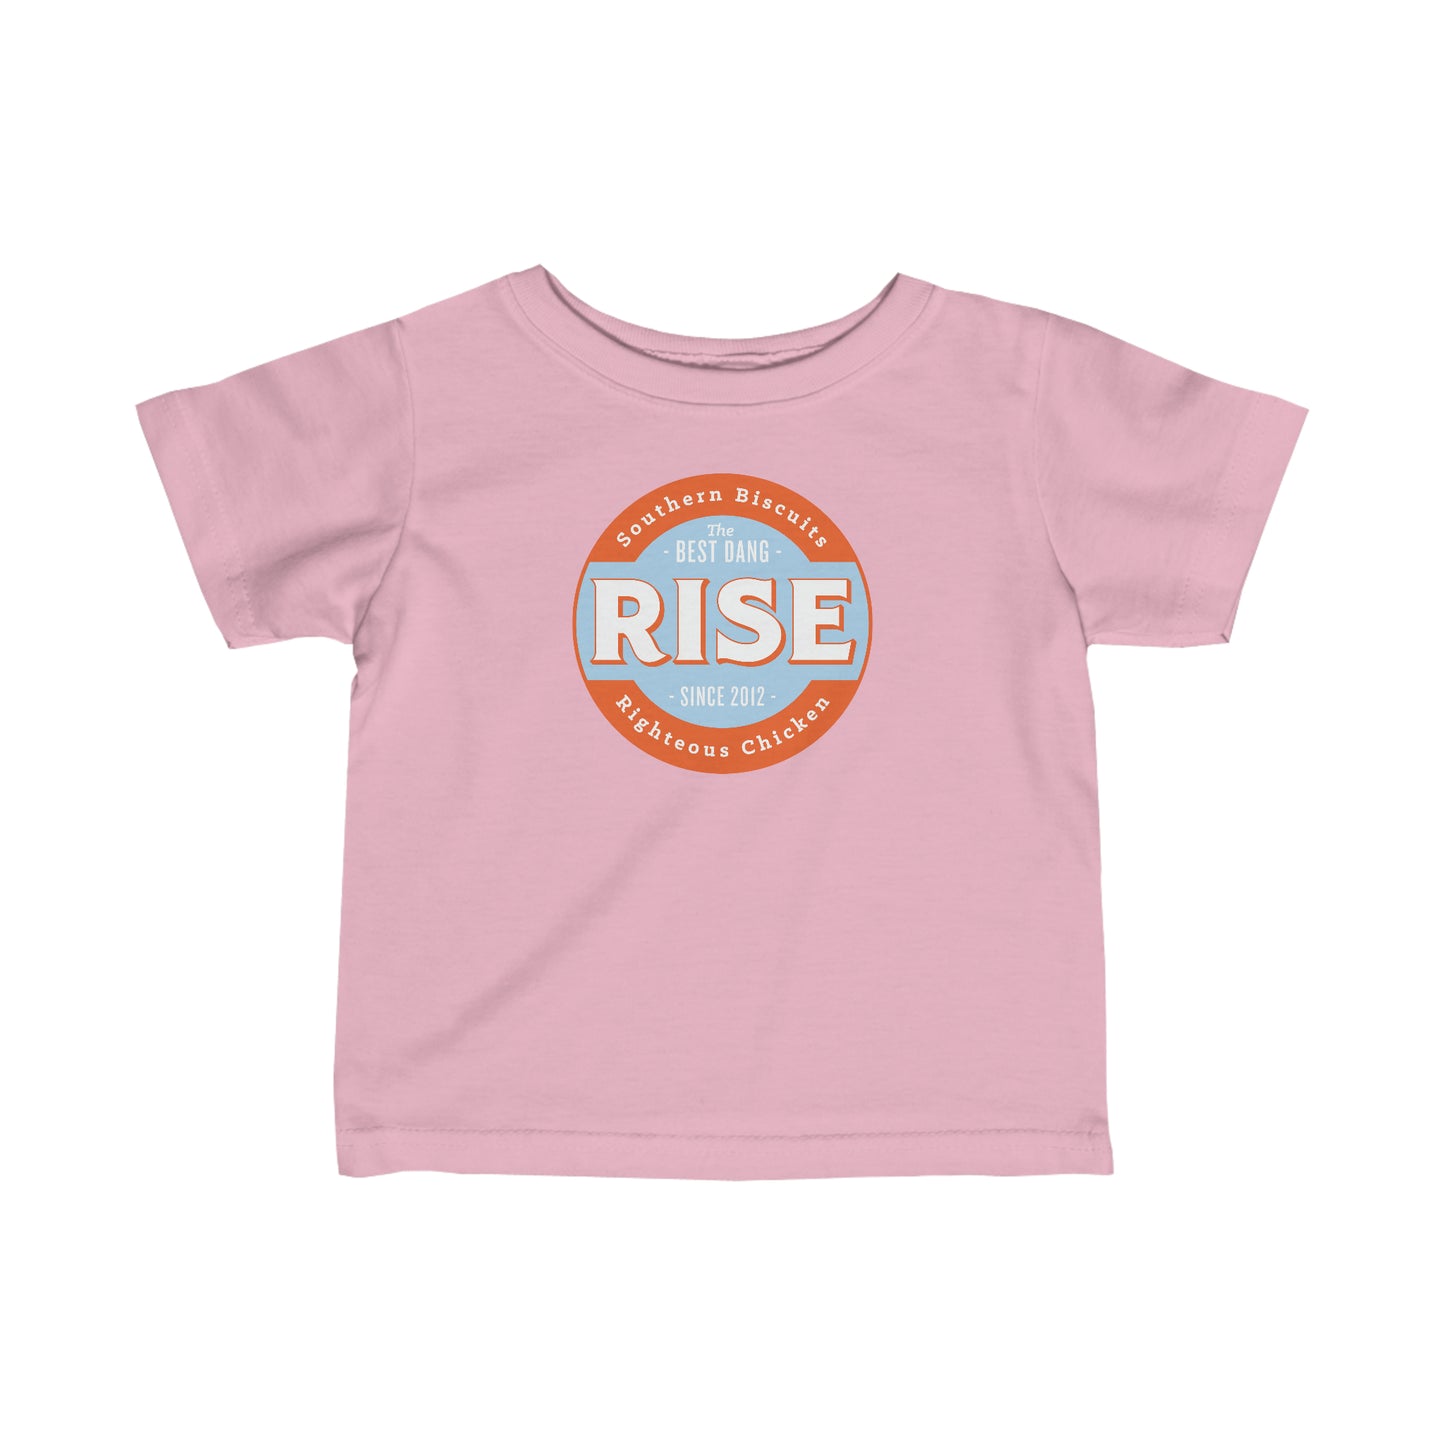 Rise - Infant Tee - Pink